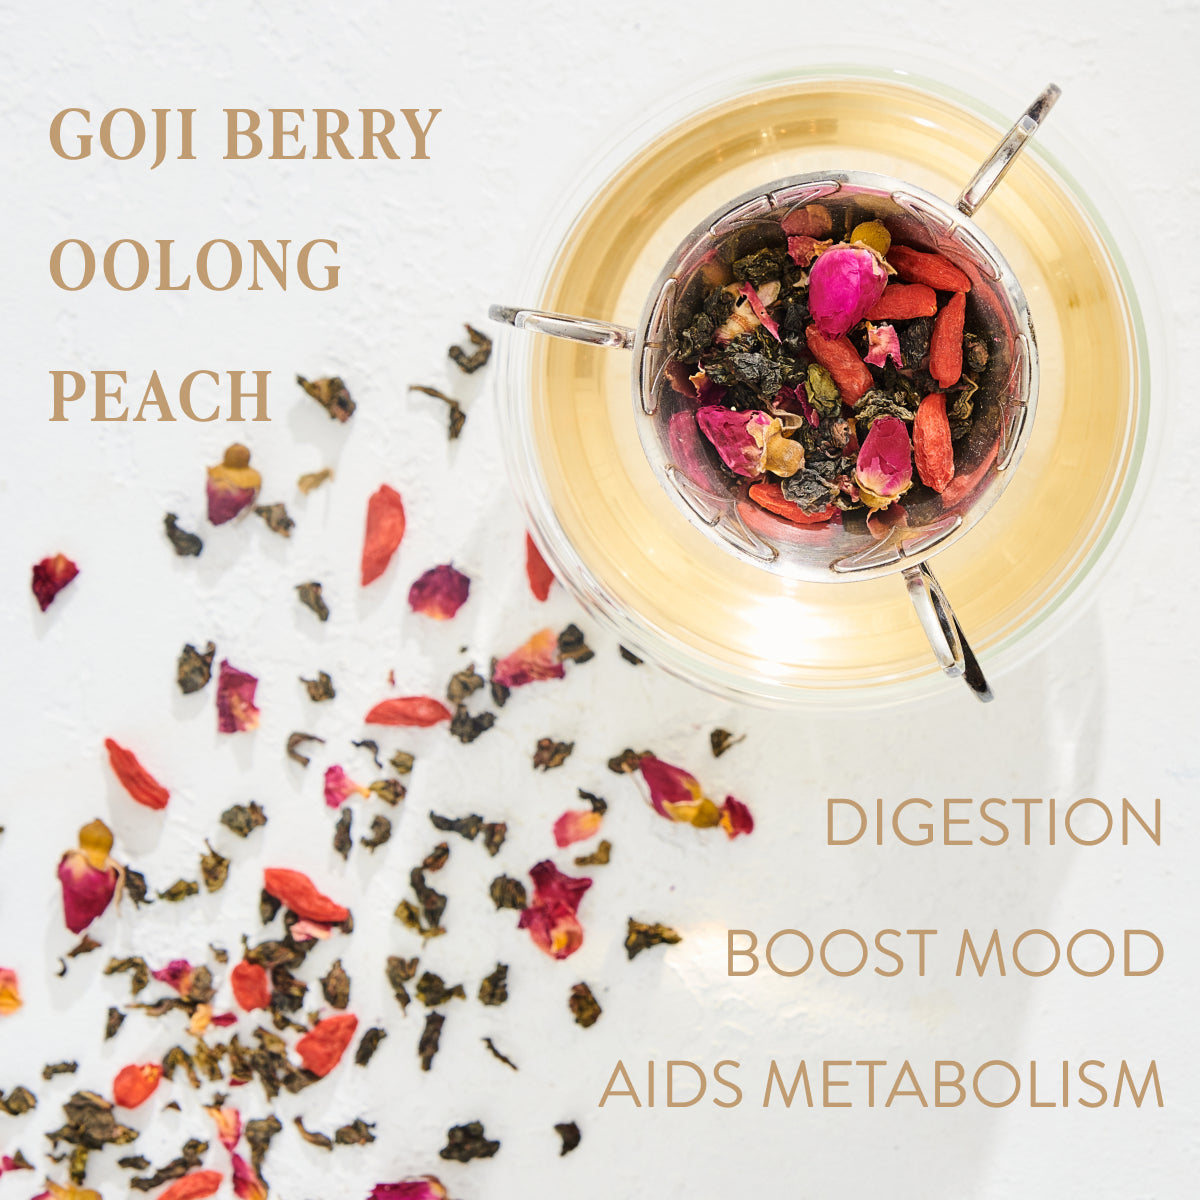 A top-view image of a glass teacup filled with a loose leaf tea blend, featuring goji berries, rose petals, and oolong tea. Tea leaves and flower petals are scattered around the cup. Text reads: "Organic Goji Berry, Oolong, Peach. Digestion, Boost Mood, Aids Metabolism." Experience Renewal: Peach-Goji-Rose Oolong Tea by Magic Hour.
